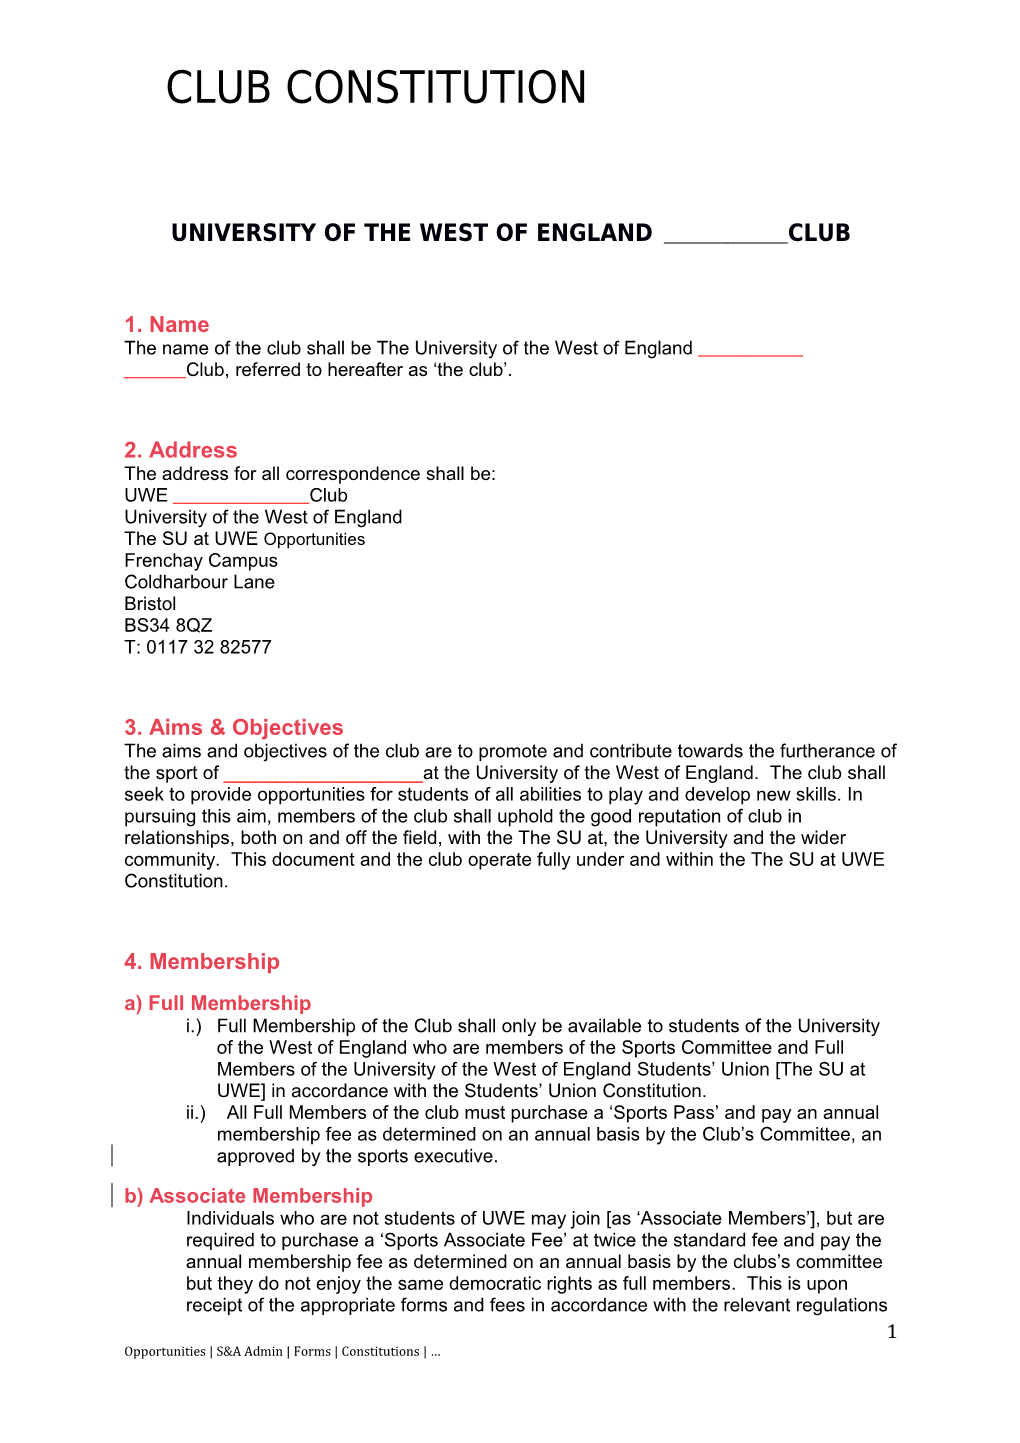 University of the West of England Club